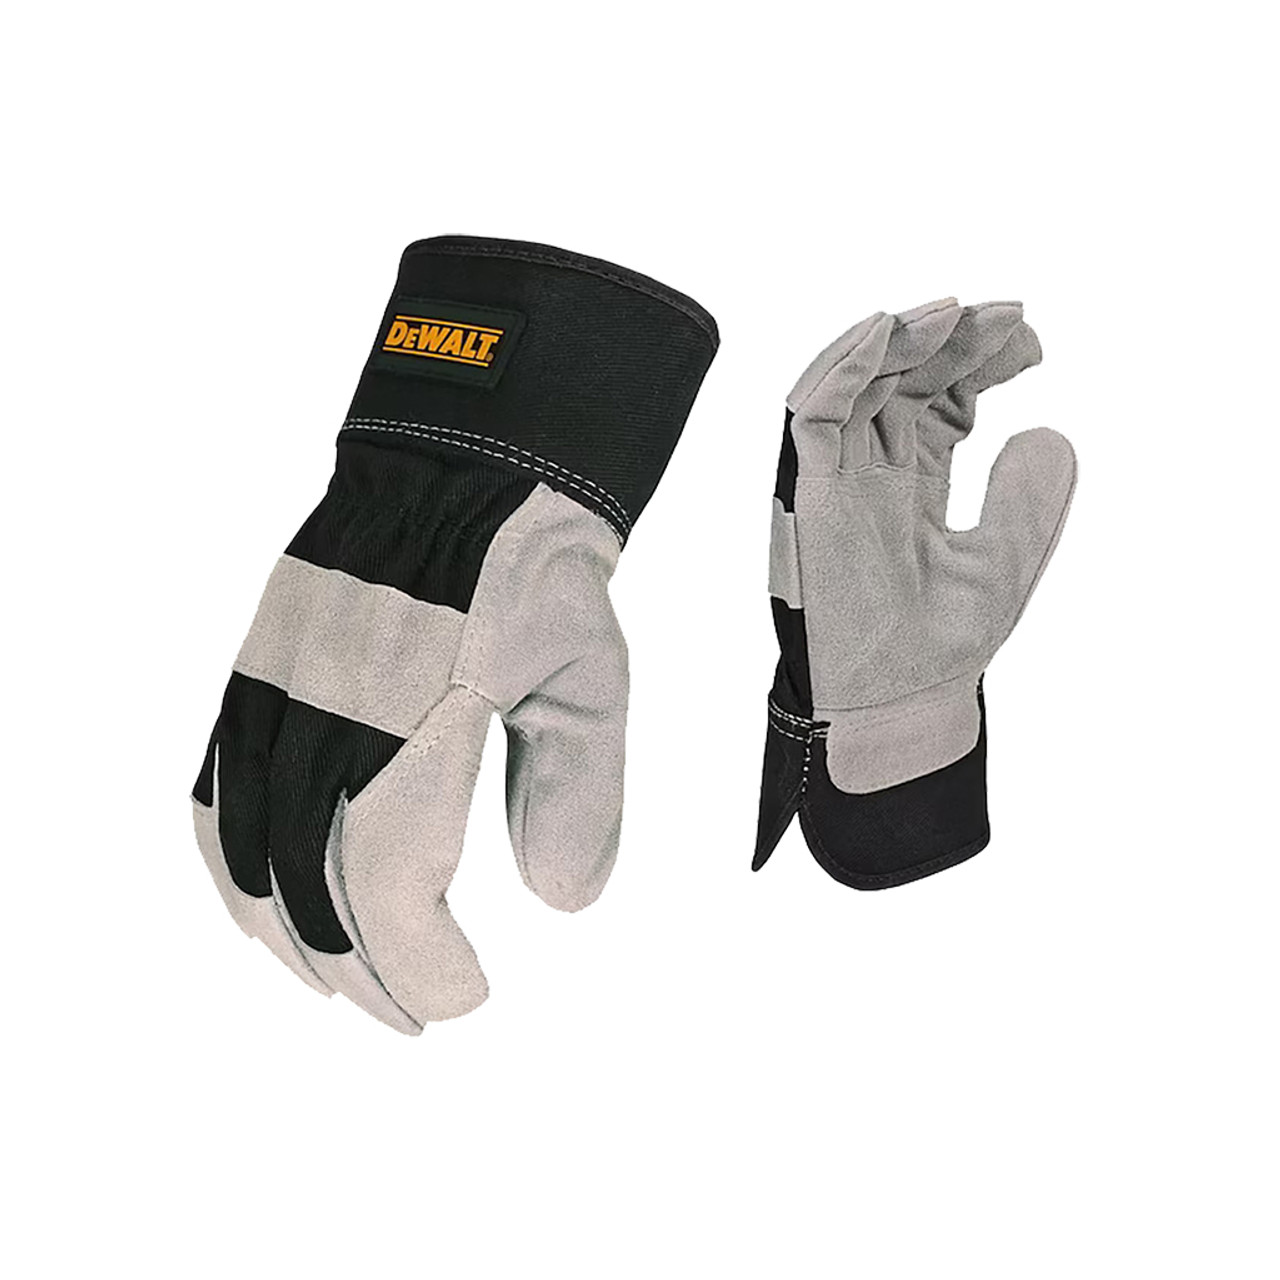 DeWalt Synthetic Leather Work Gloves, Medium - Midwest Technology Products